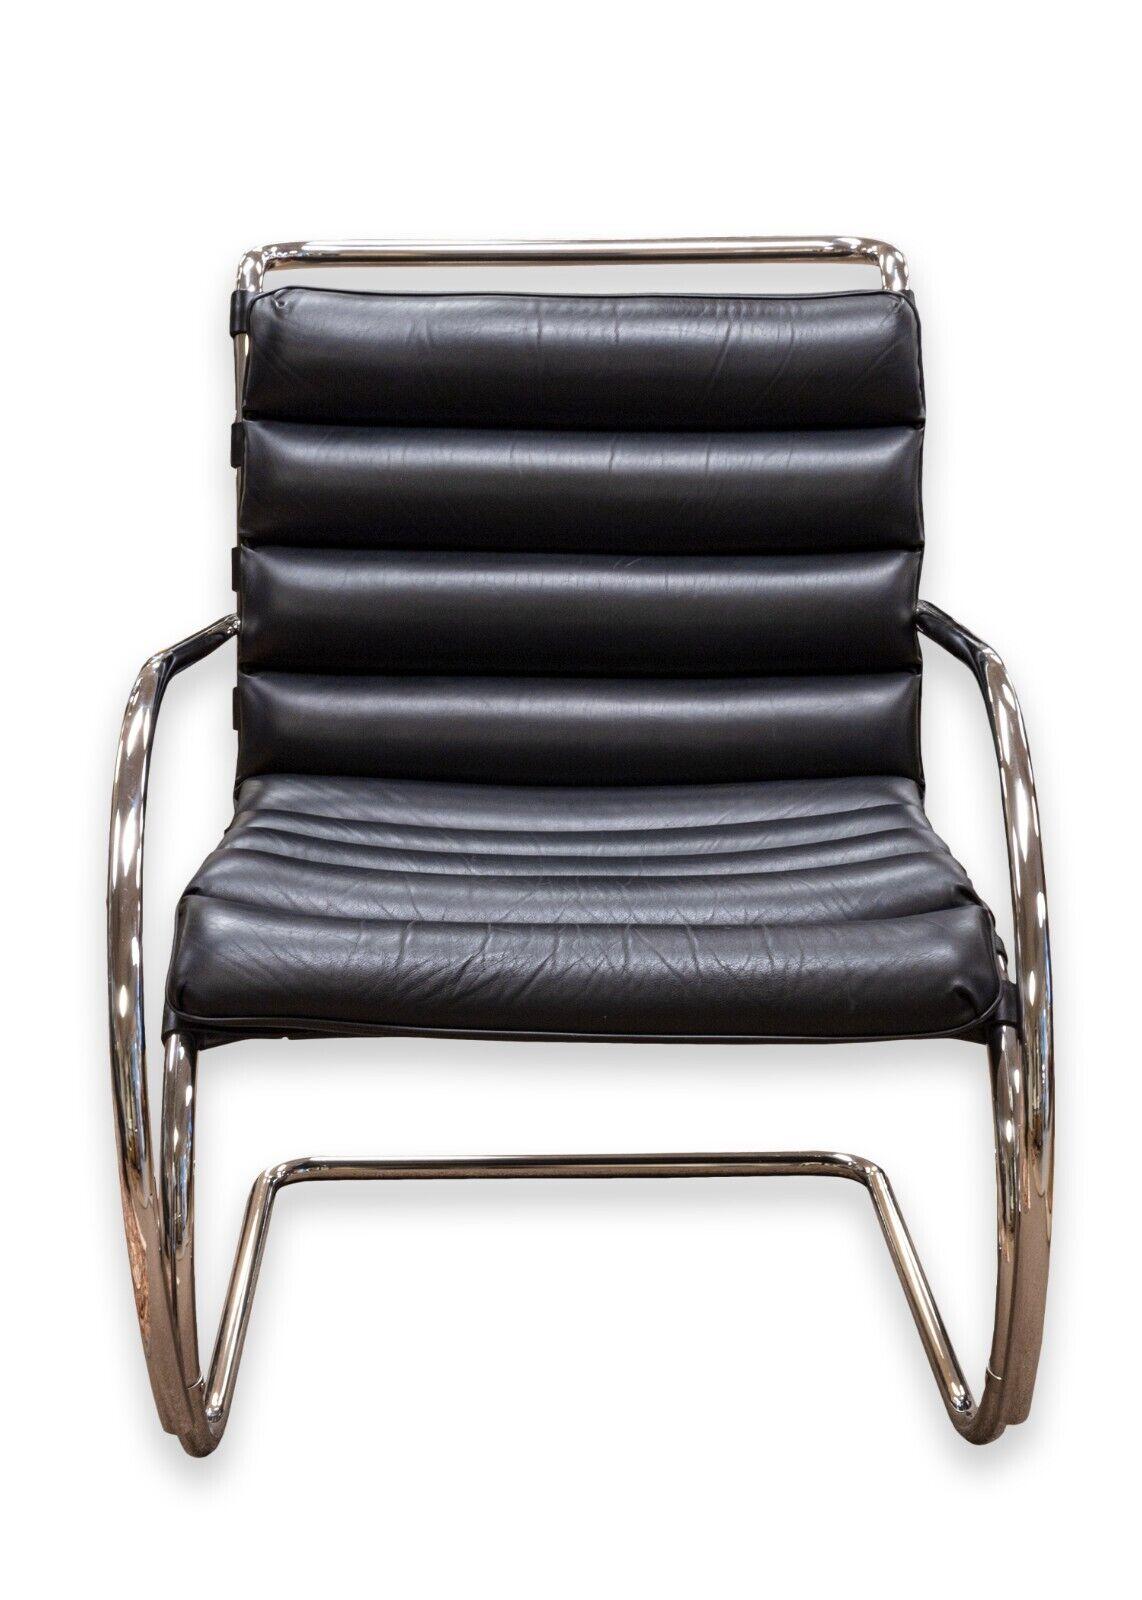 A pair of Mies van der Rohe MR lounge chairs. A gorgeous pair of lounge chairs with a sophisticated, elegant cantilever design with tubular chrome steel, and padded black leather seats. These chairs were originally designed by Mies in 1927 for the